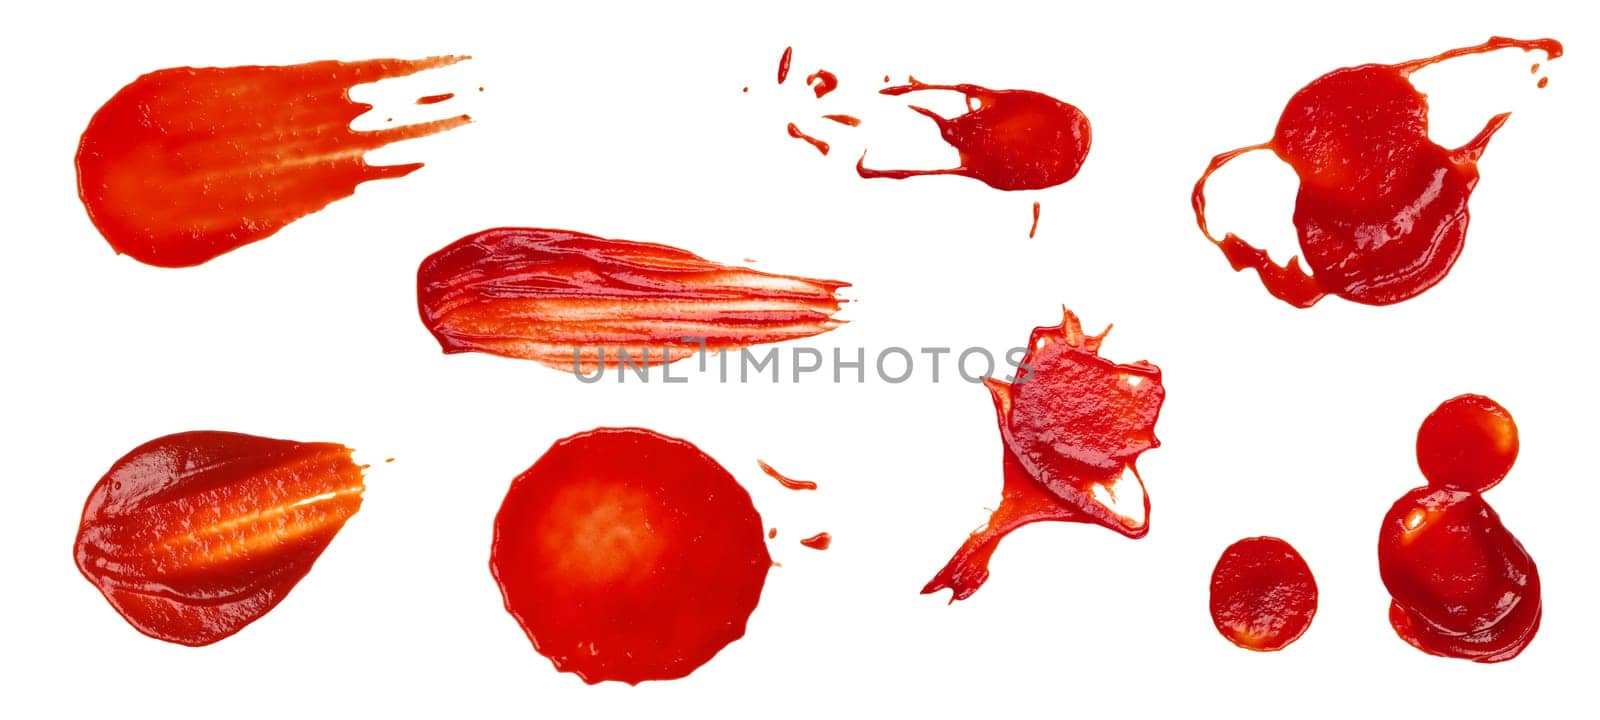 Collection of red tomato ketchup stains by BreakingTheWalls